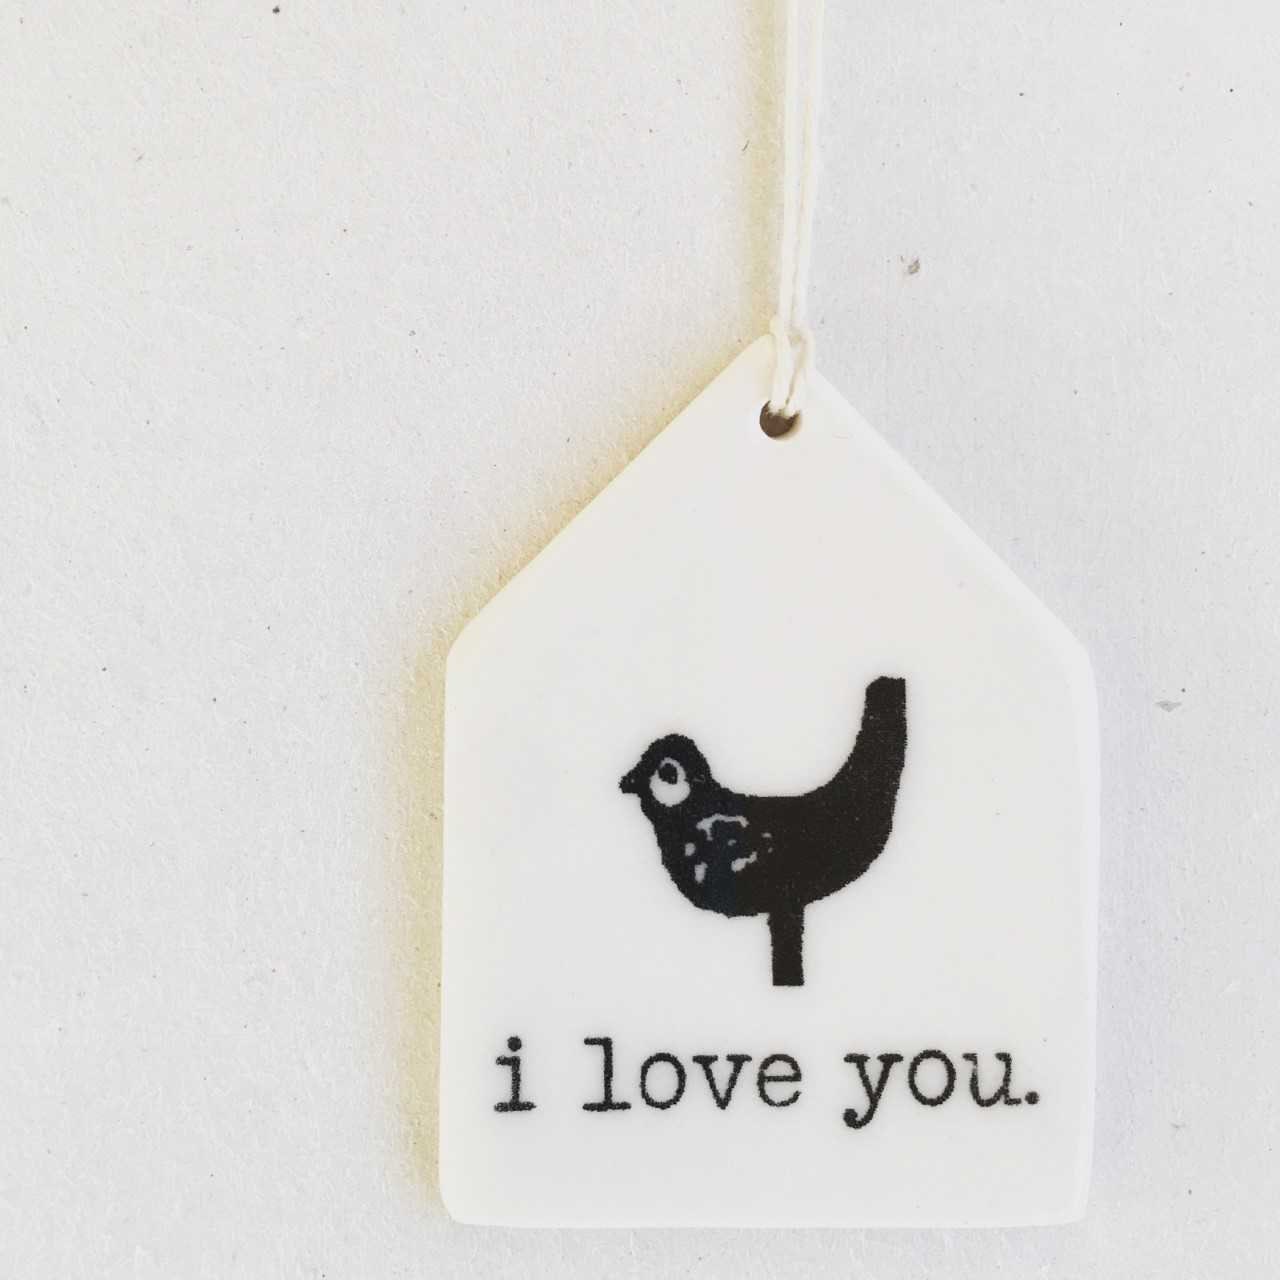 i love you | love quote | ceramic wall tag | ceramic wall art | porcelain | minimalist design | home decor | meaningful gift